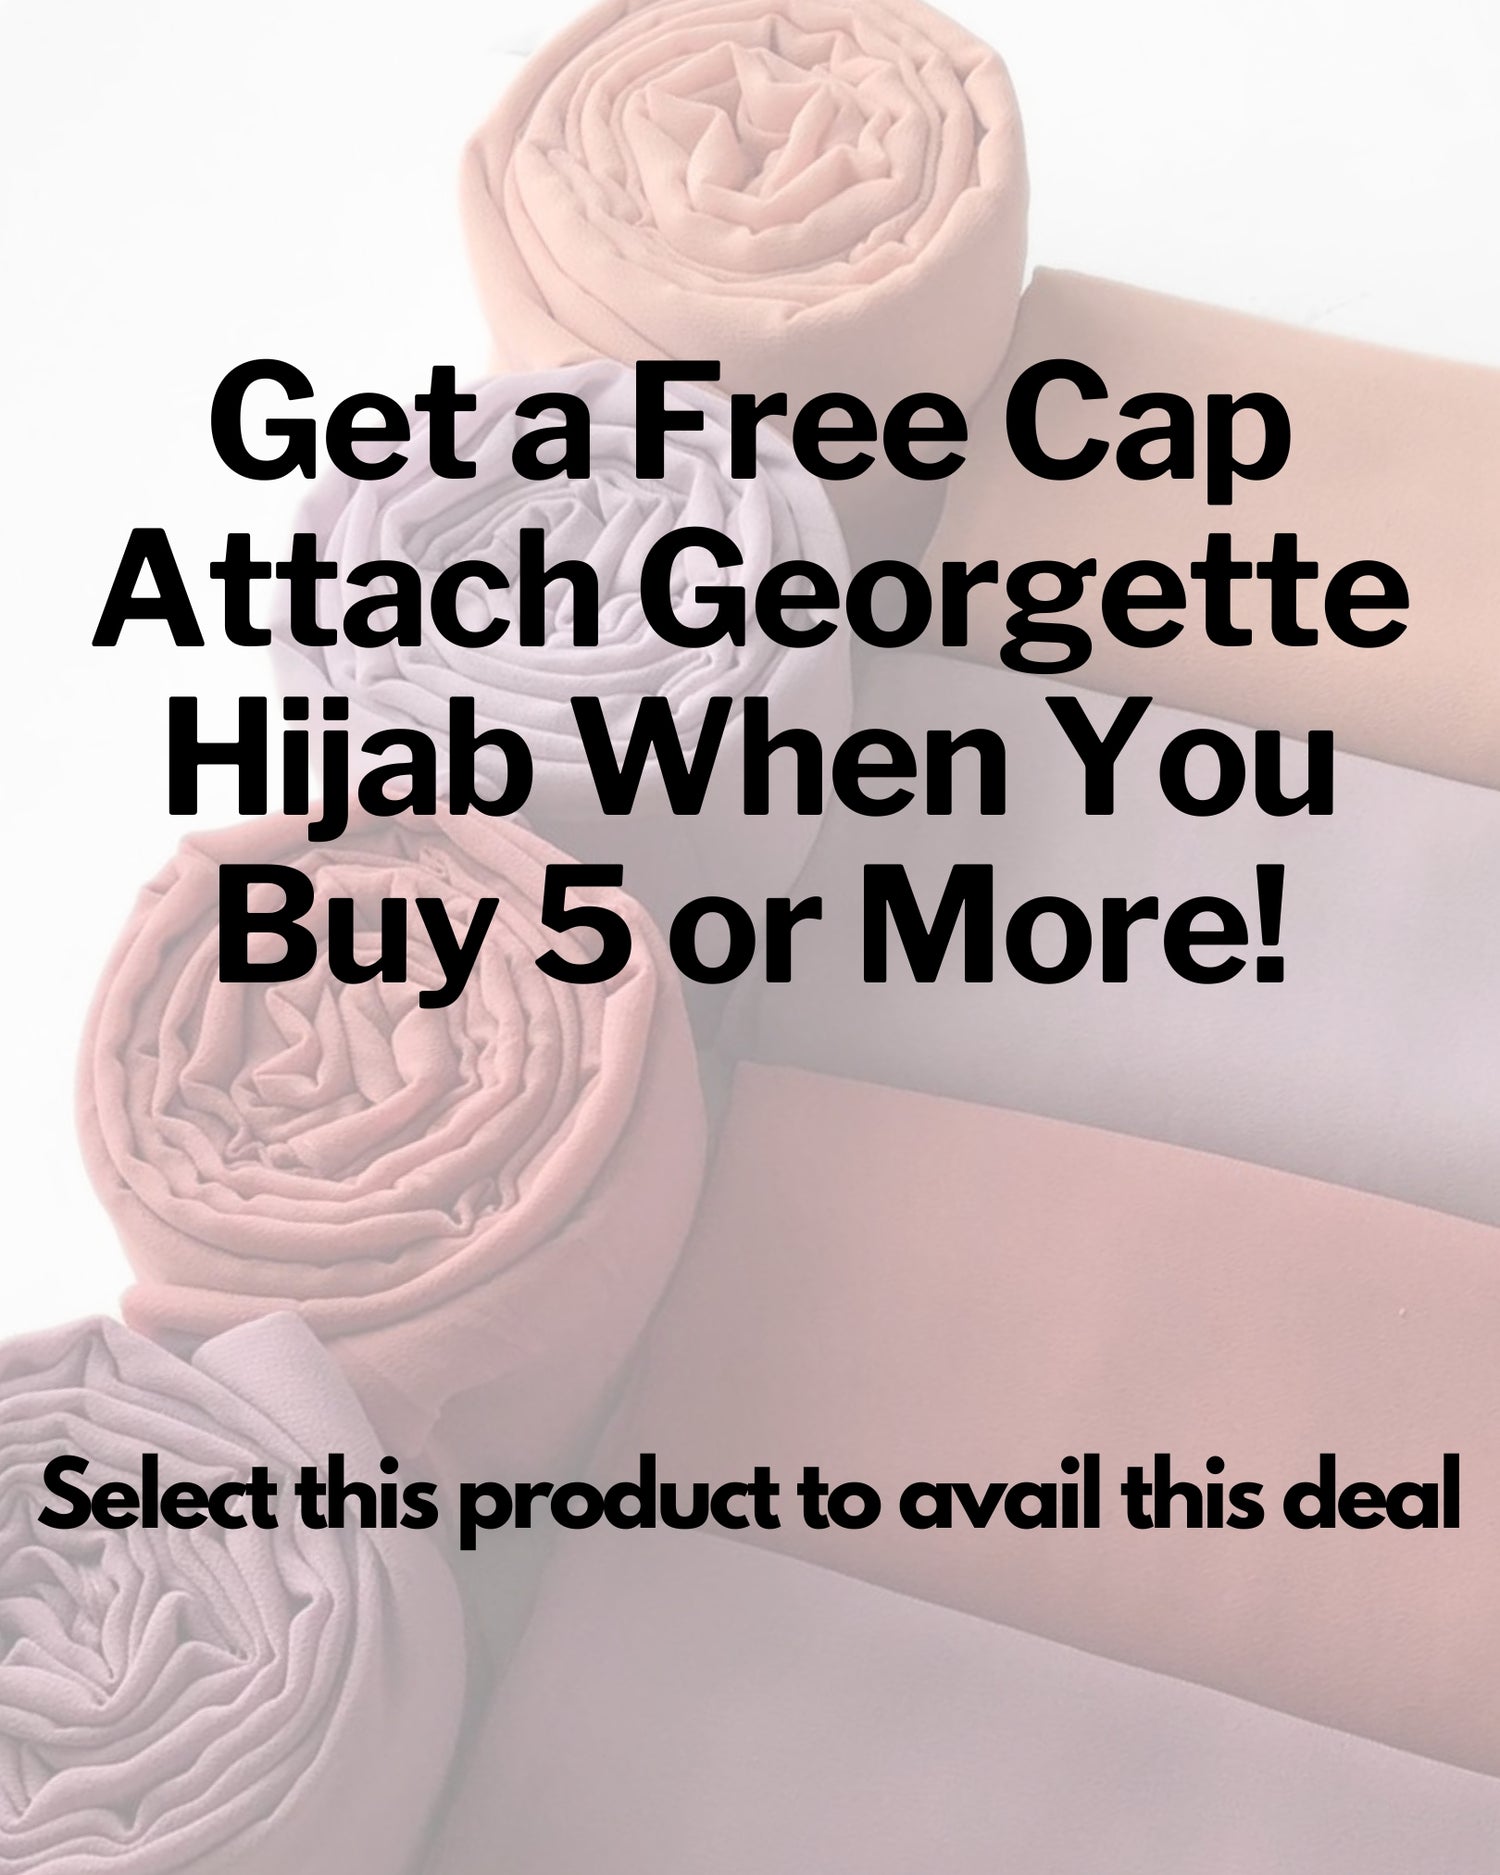 Cap Attached Georgette Hijab - Buy 5 Get 1 Free